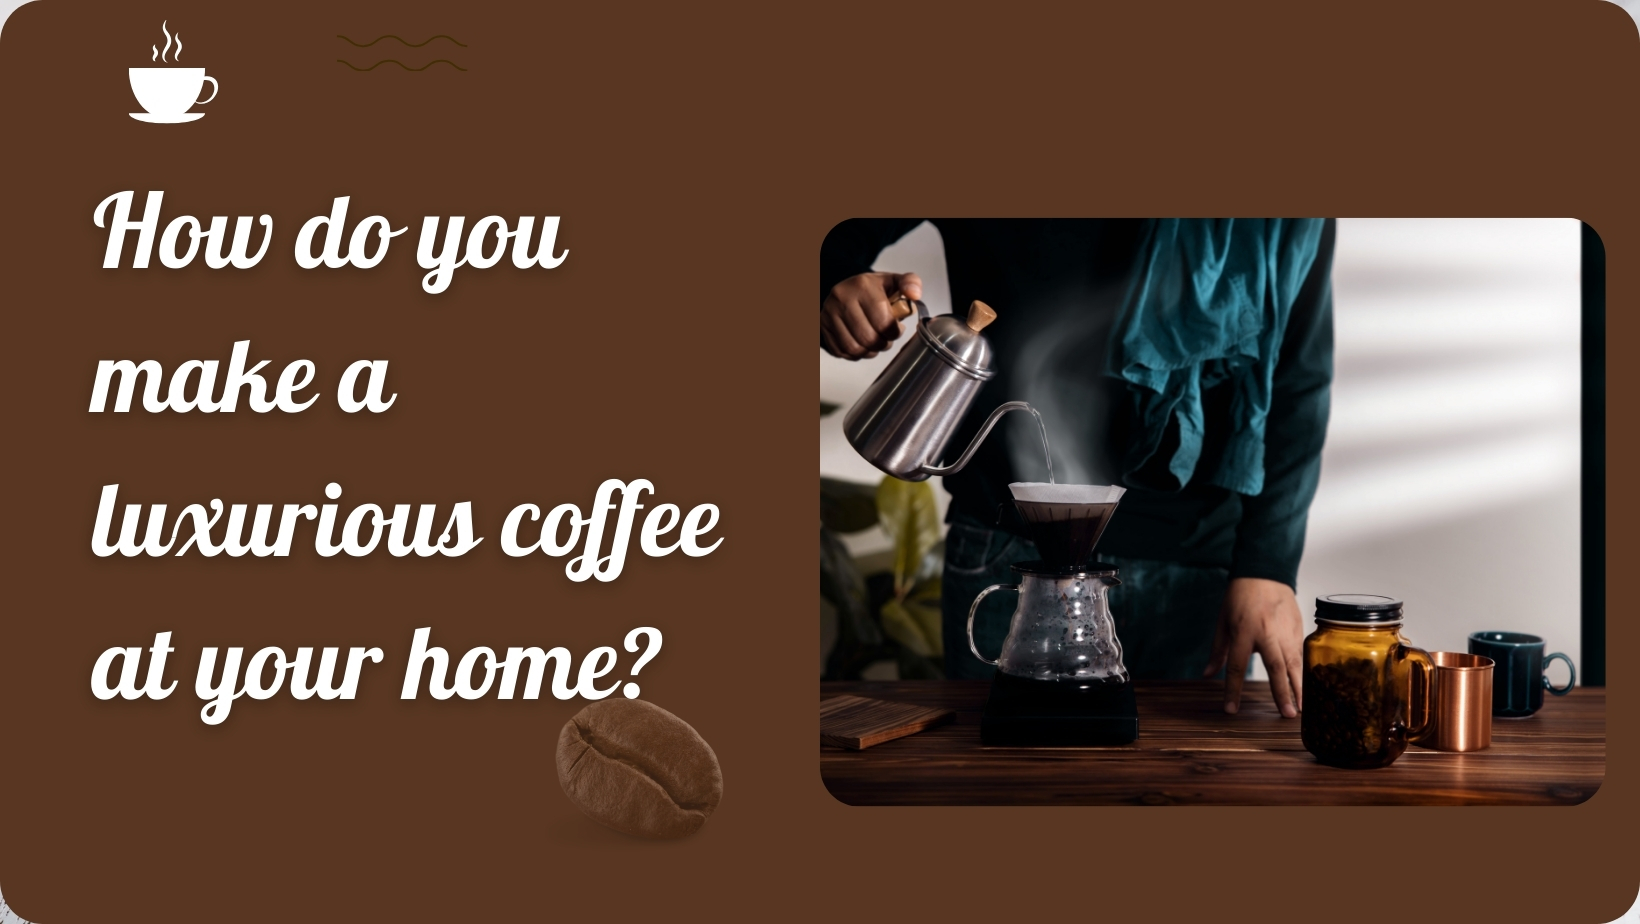 How do you make a luxurious coffee at your home?